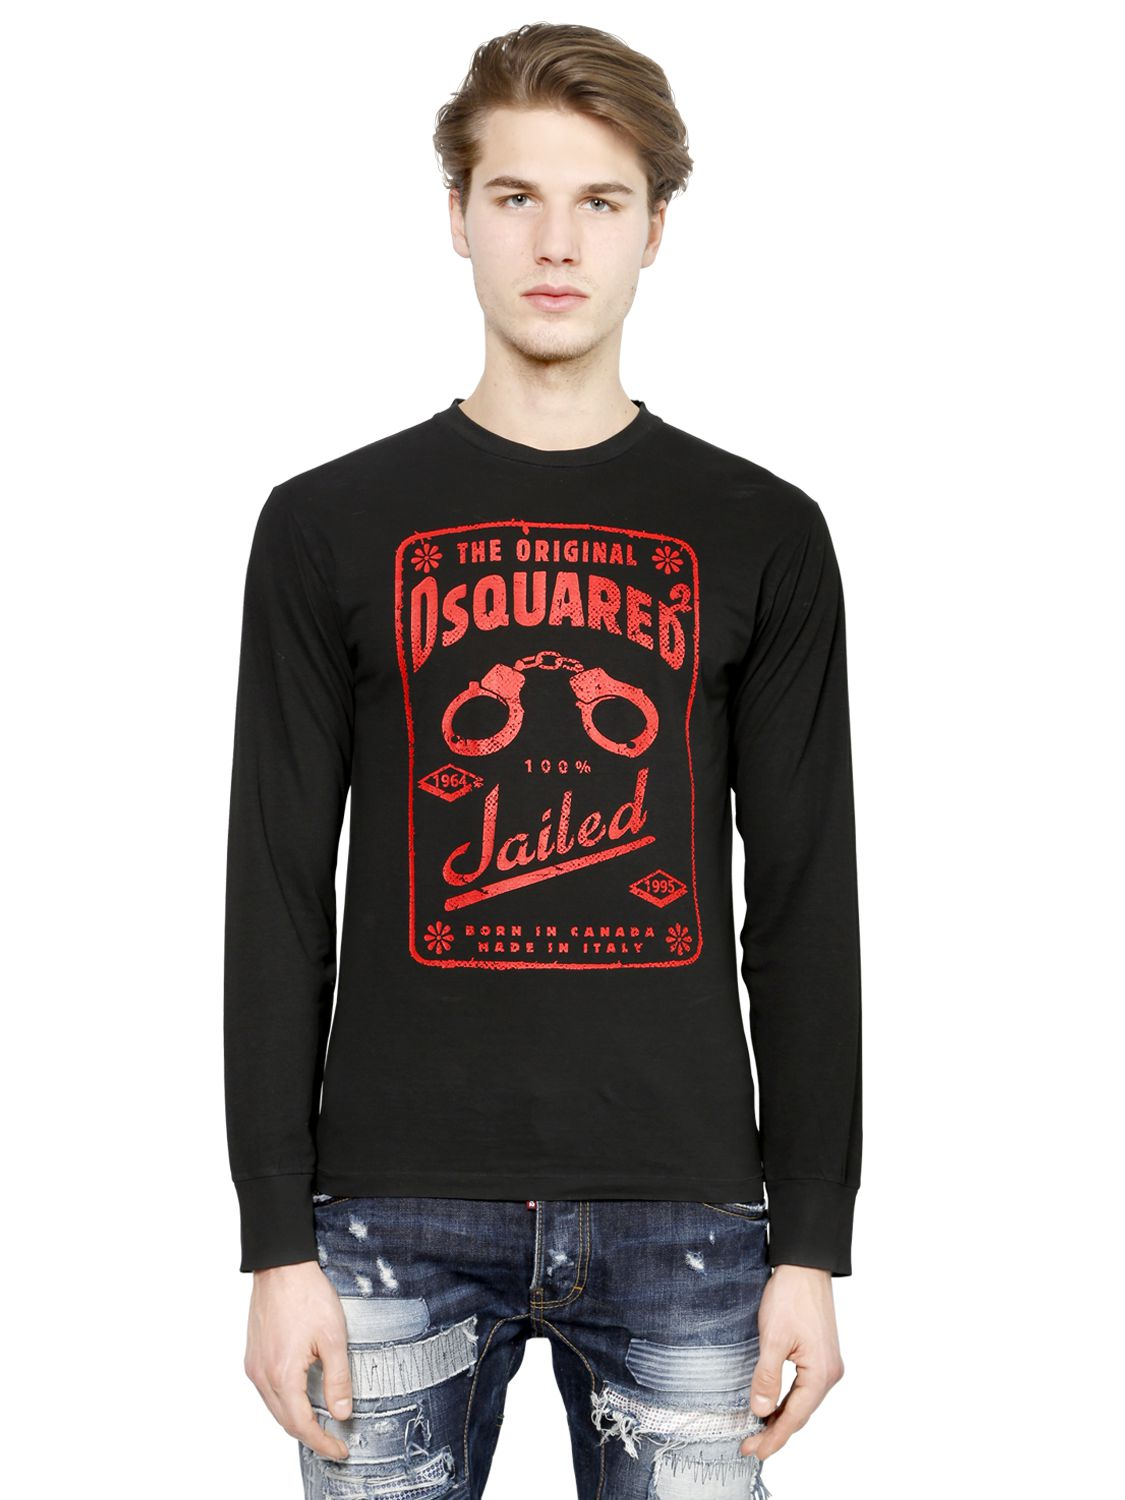 dsquared jailed t shirt